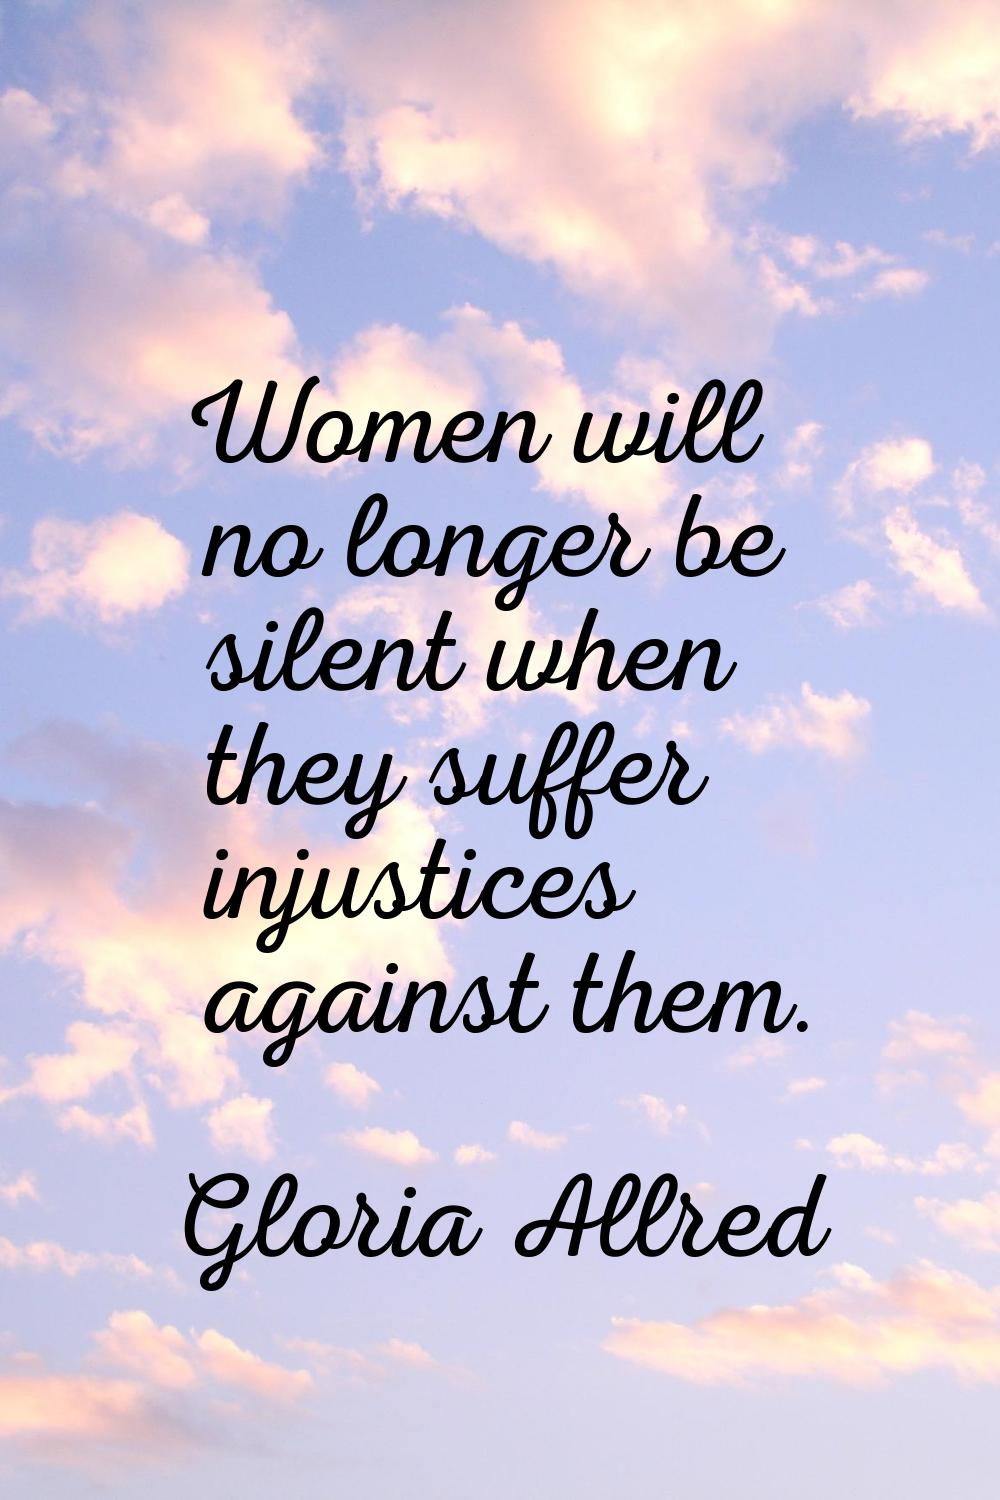 Women will no longer be silent when they suffer injustices against them.